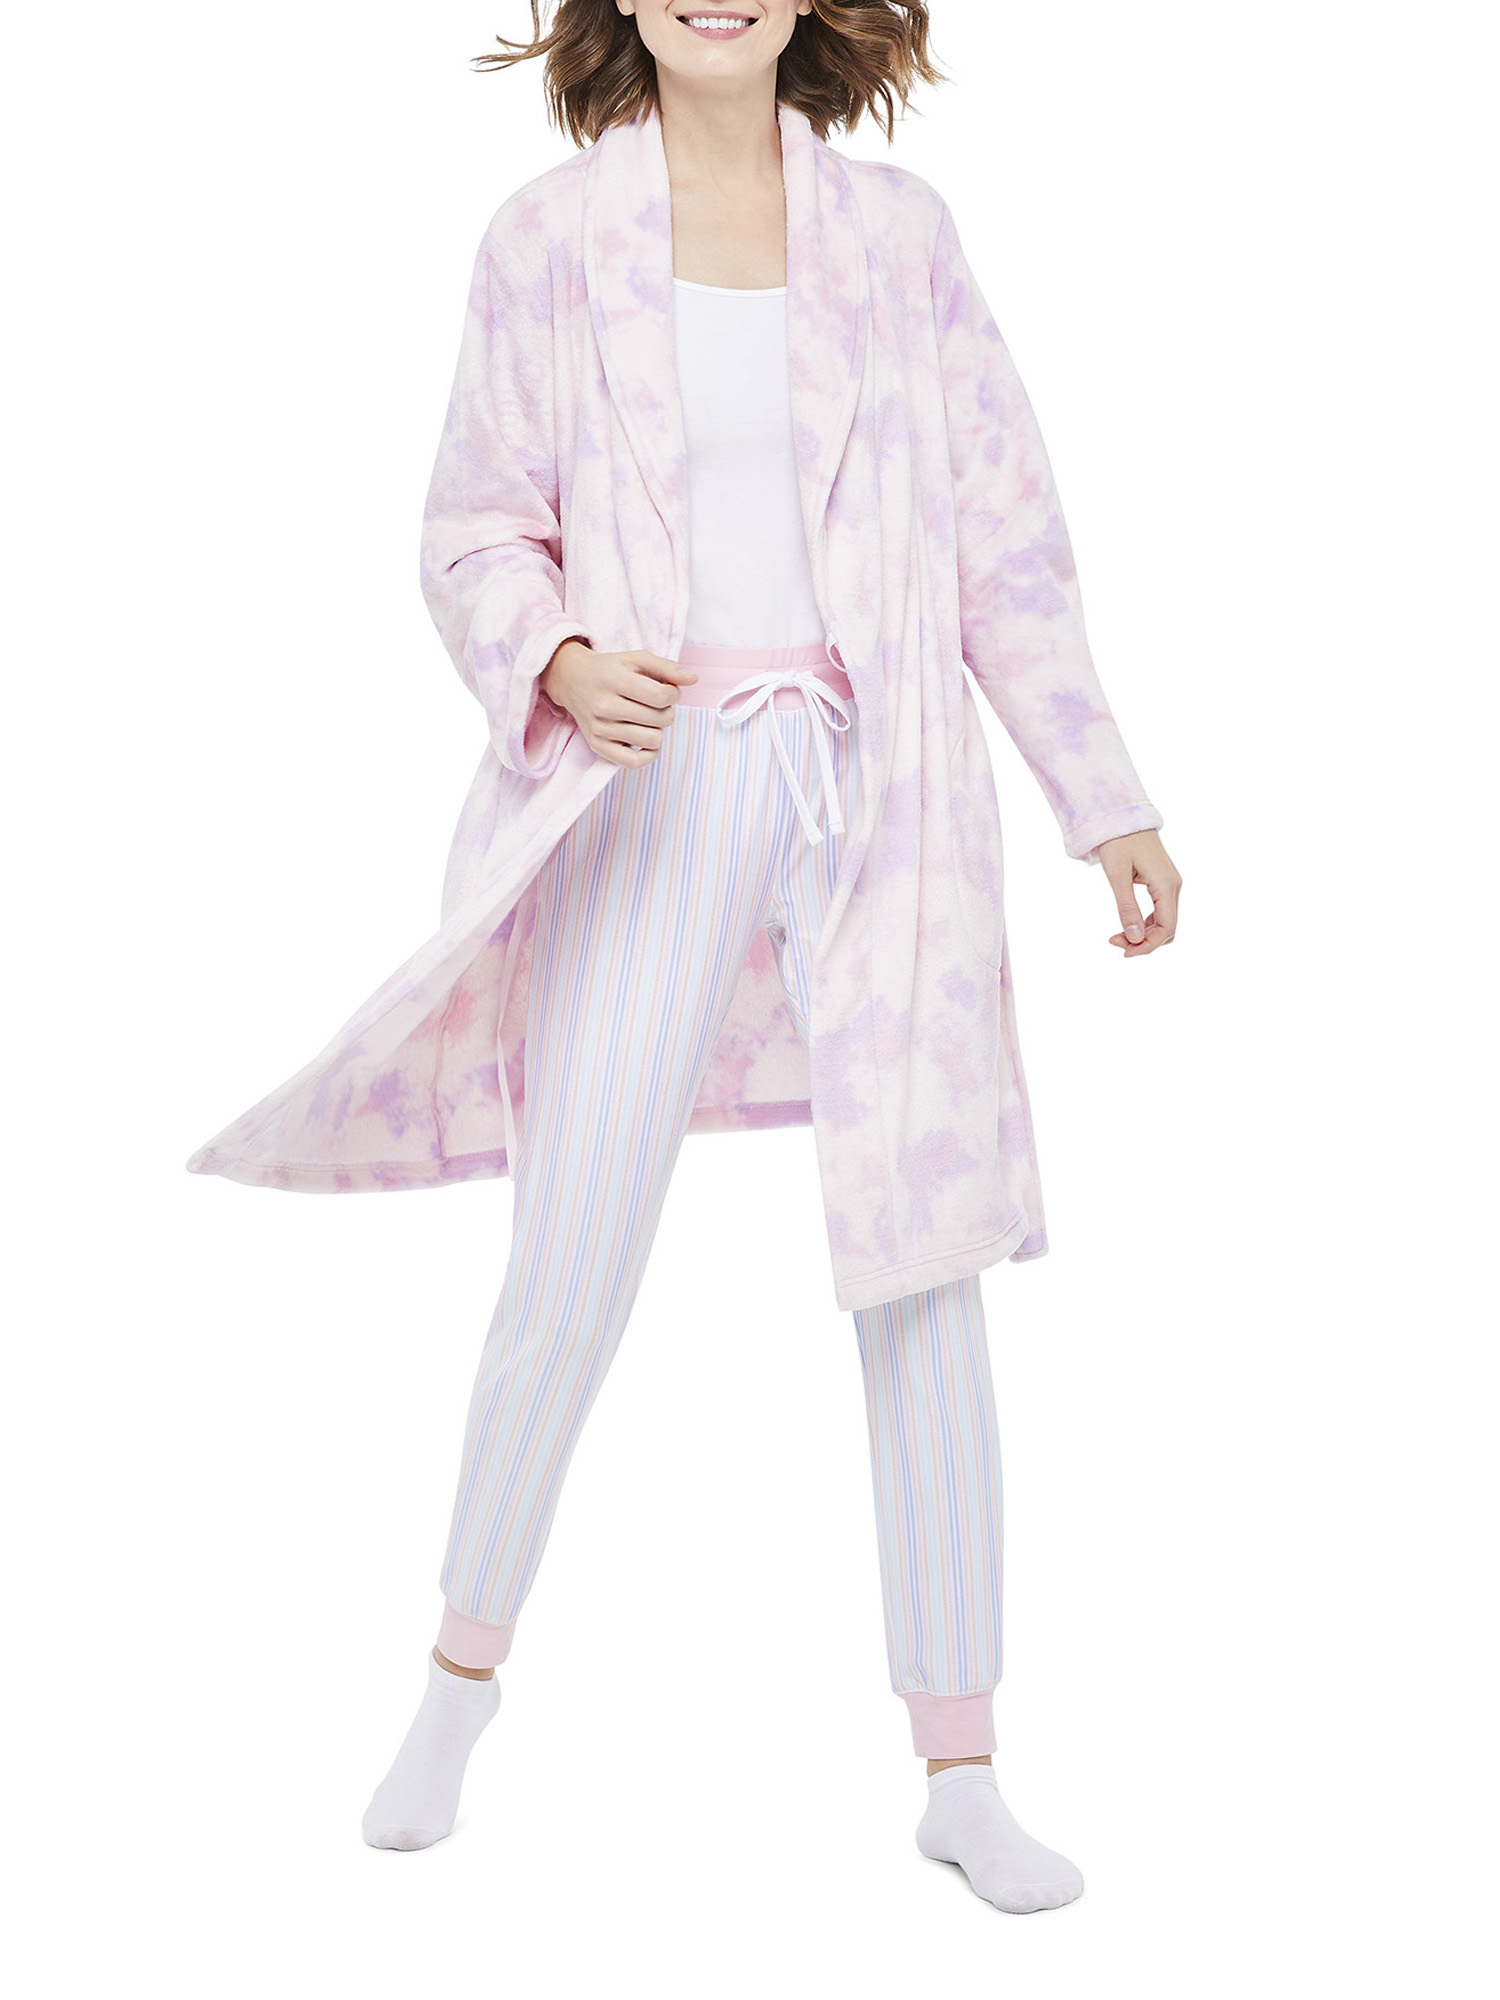 GEORGE Tie Dye Afternoon Polyester Robe (Women's or Women's Plus) 1 Pack - image 4 of 7